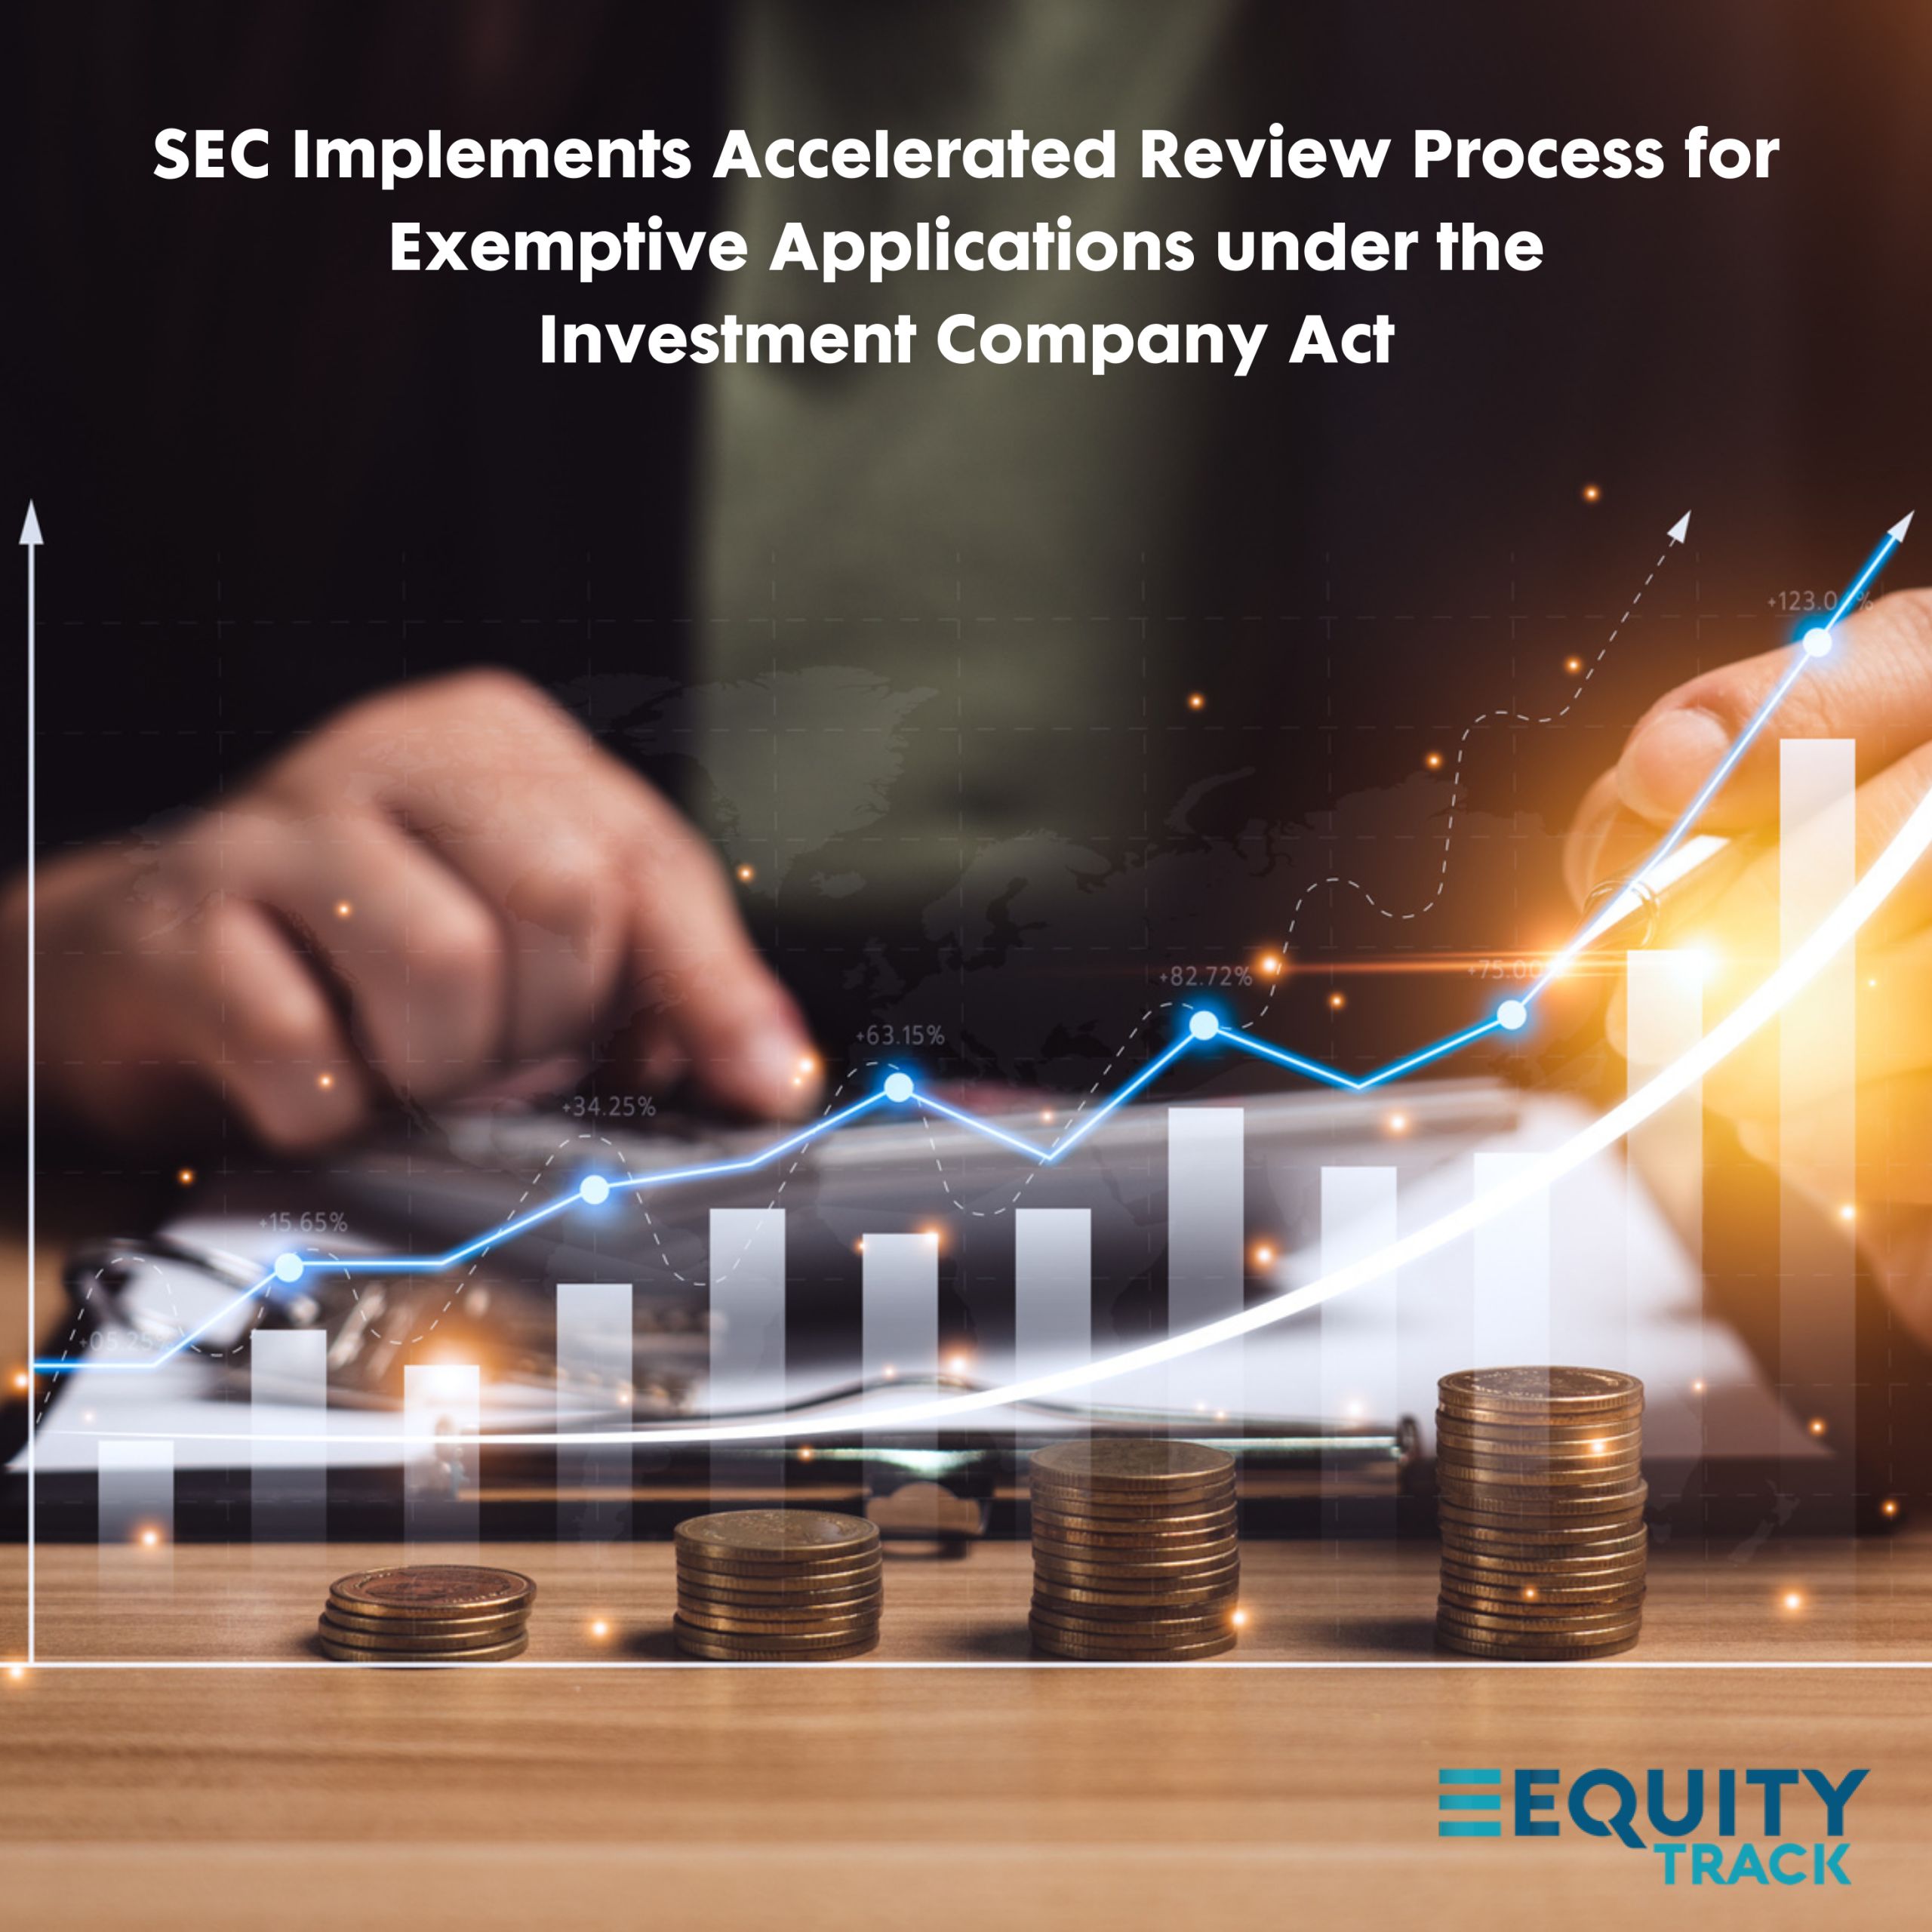 SEC Adopts Expedited Review Procedure for Exemptive Applications under the Investment Company Act